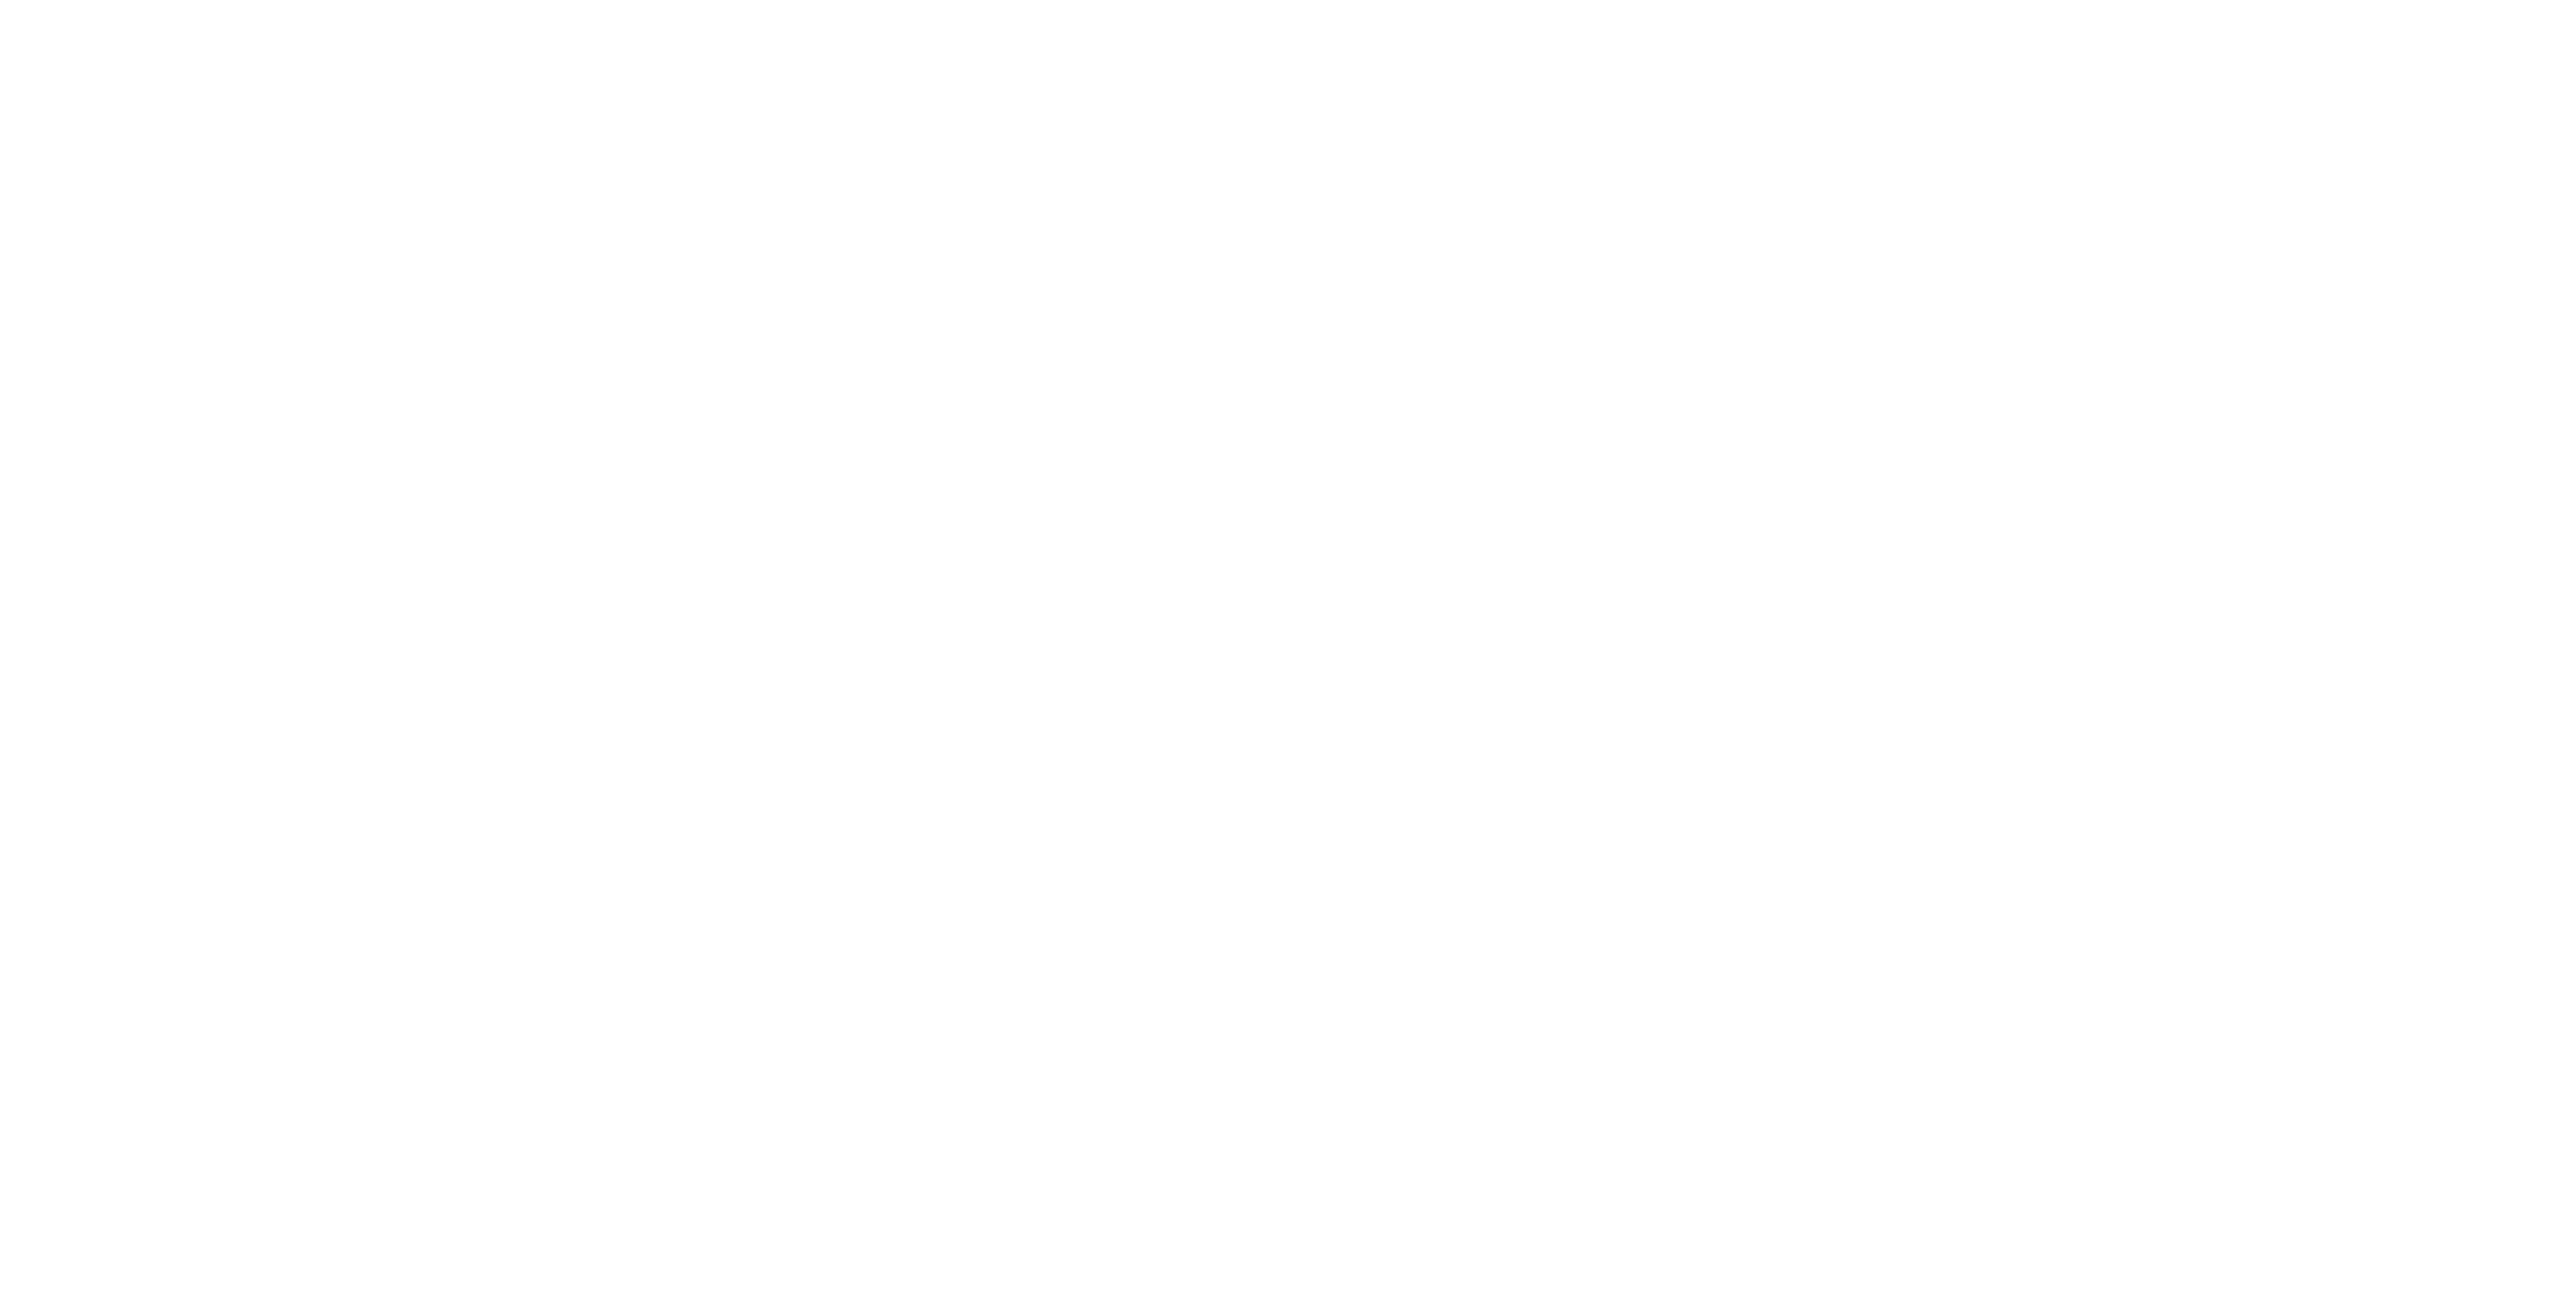 Wade McCrory Collection